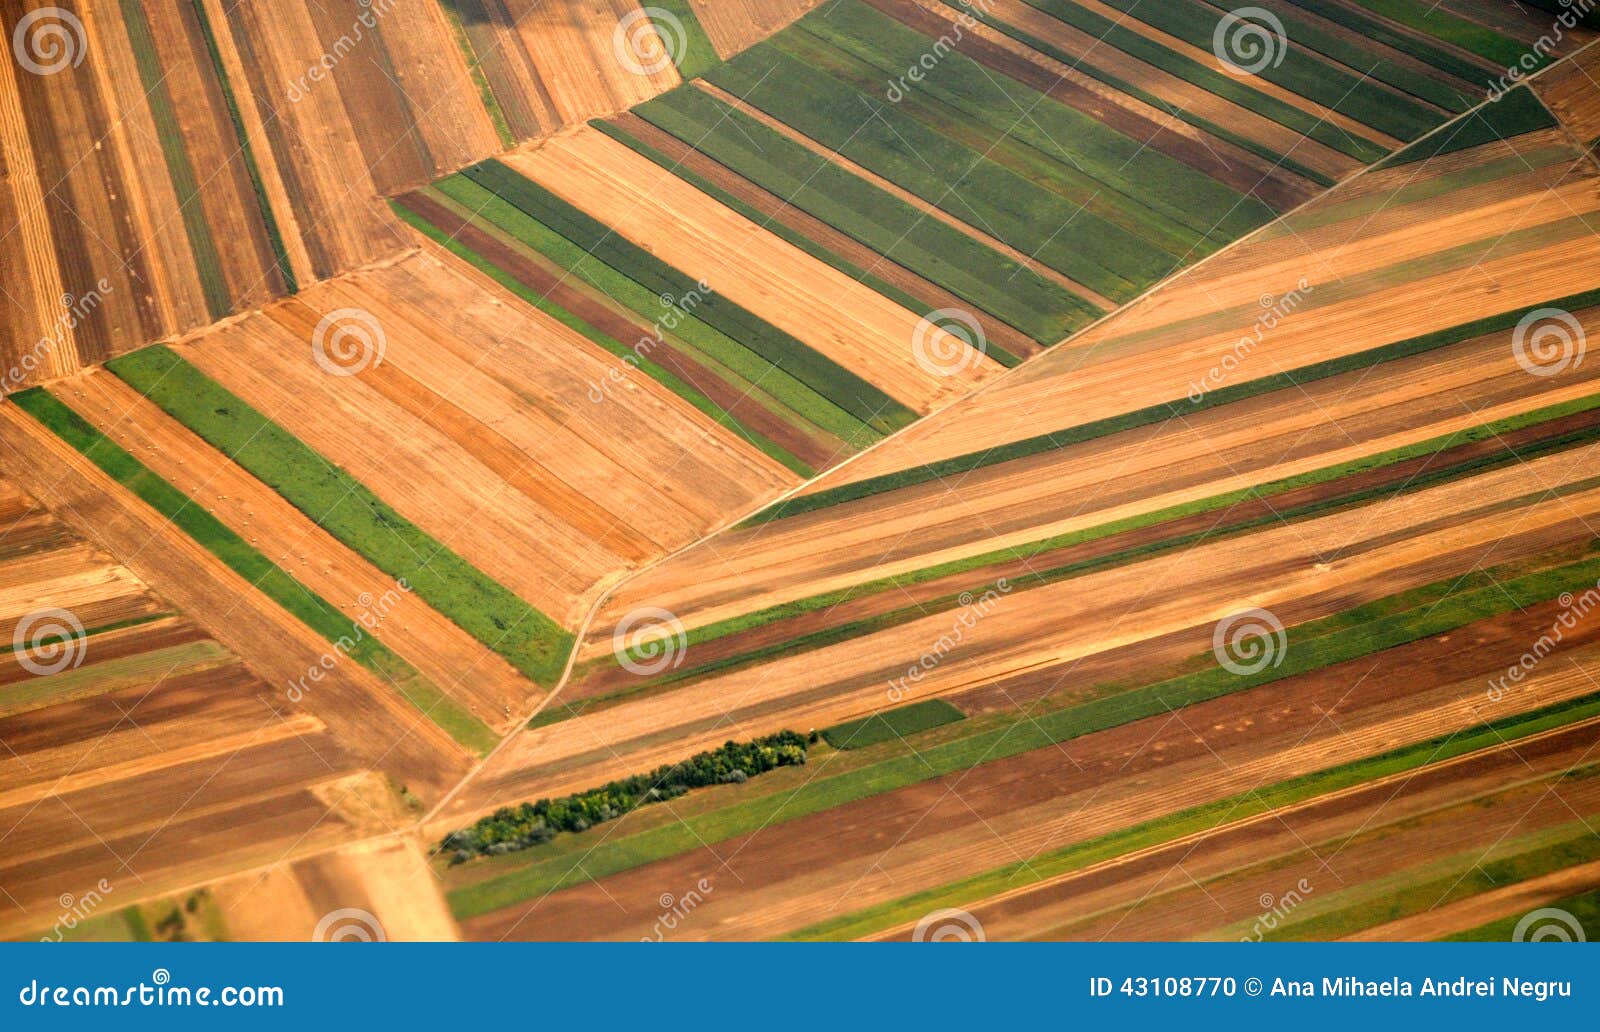 austrian cultivated land seen from a plane